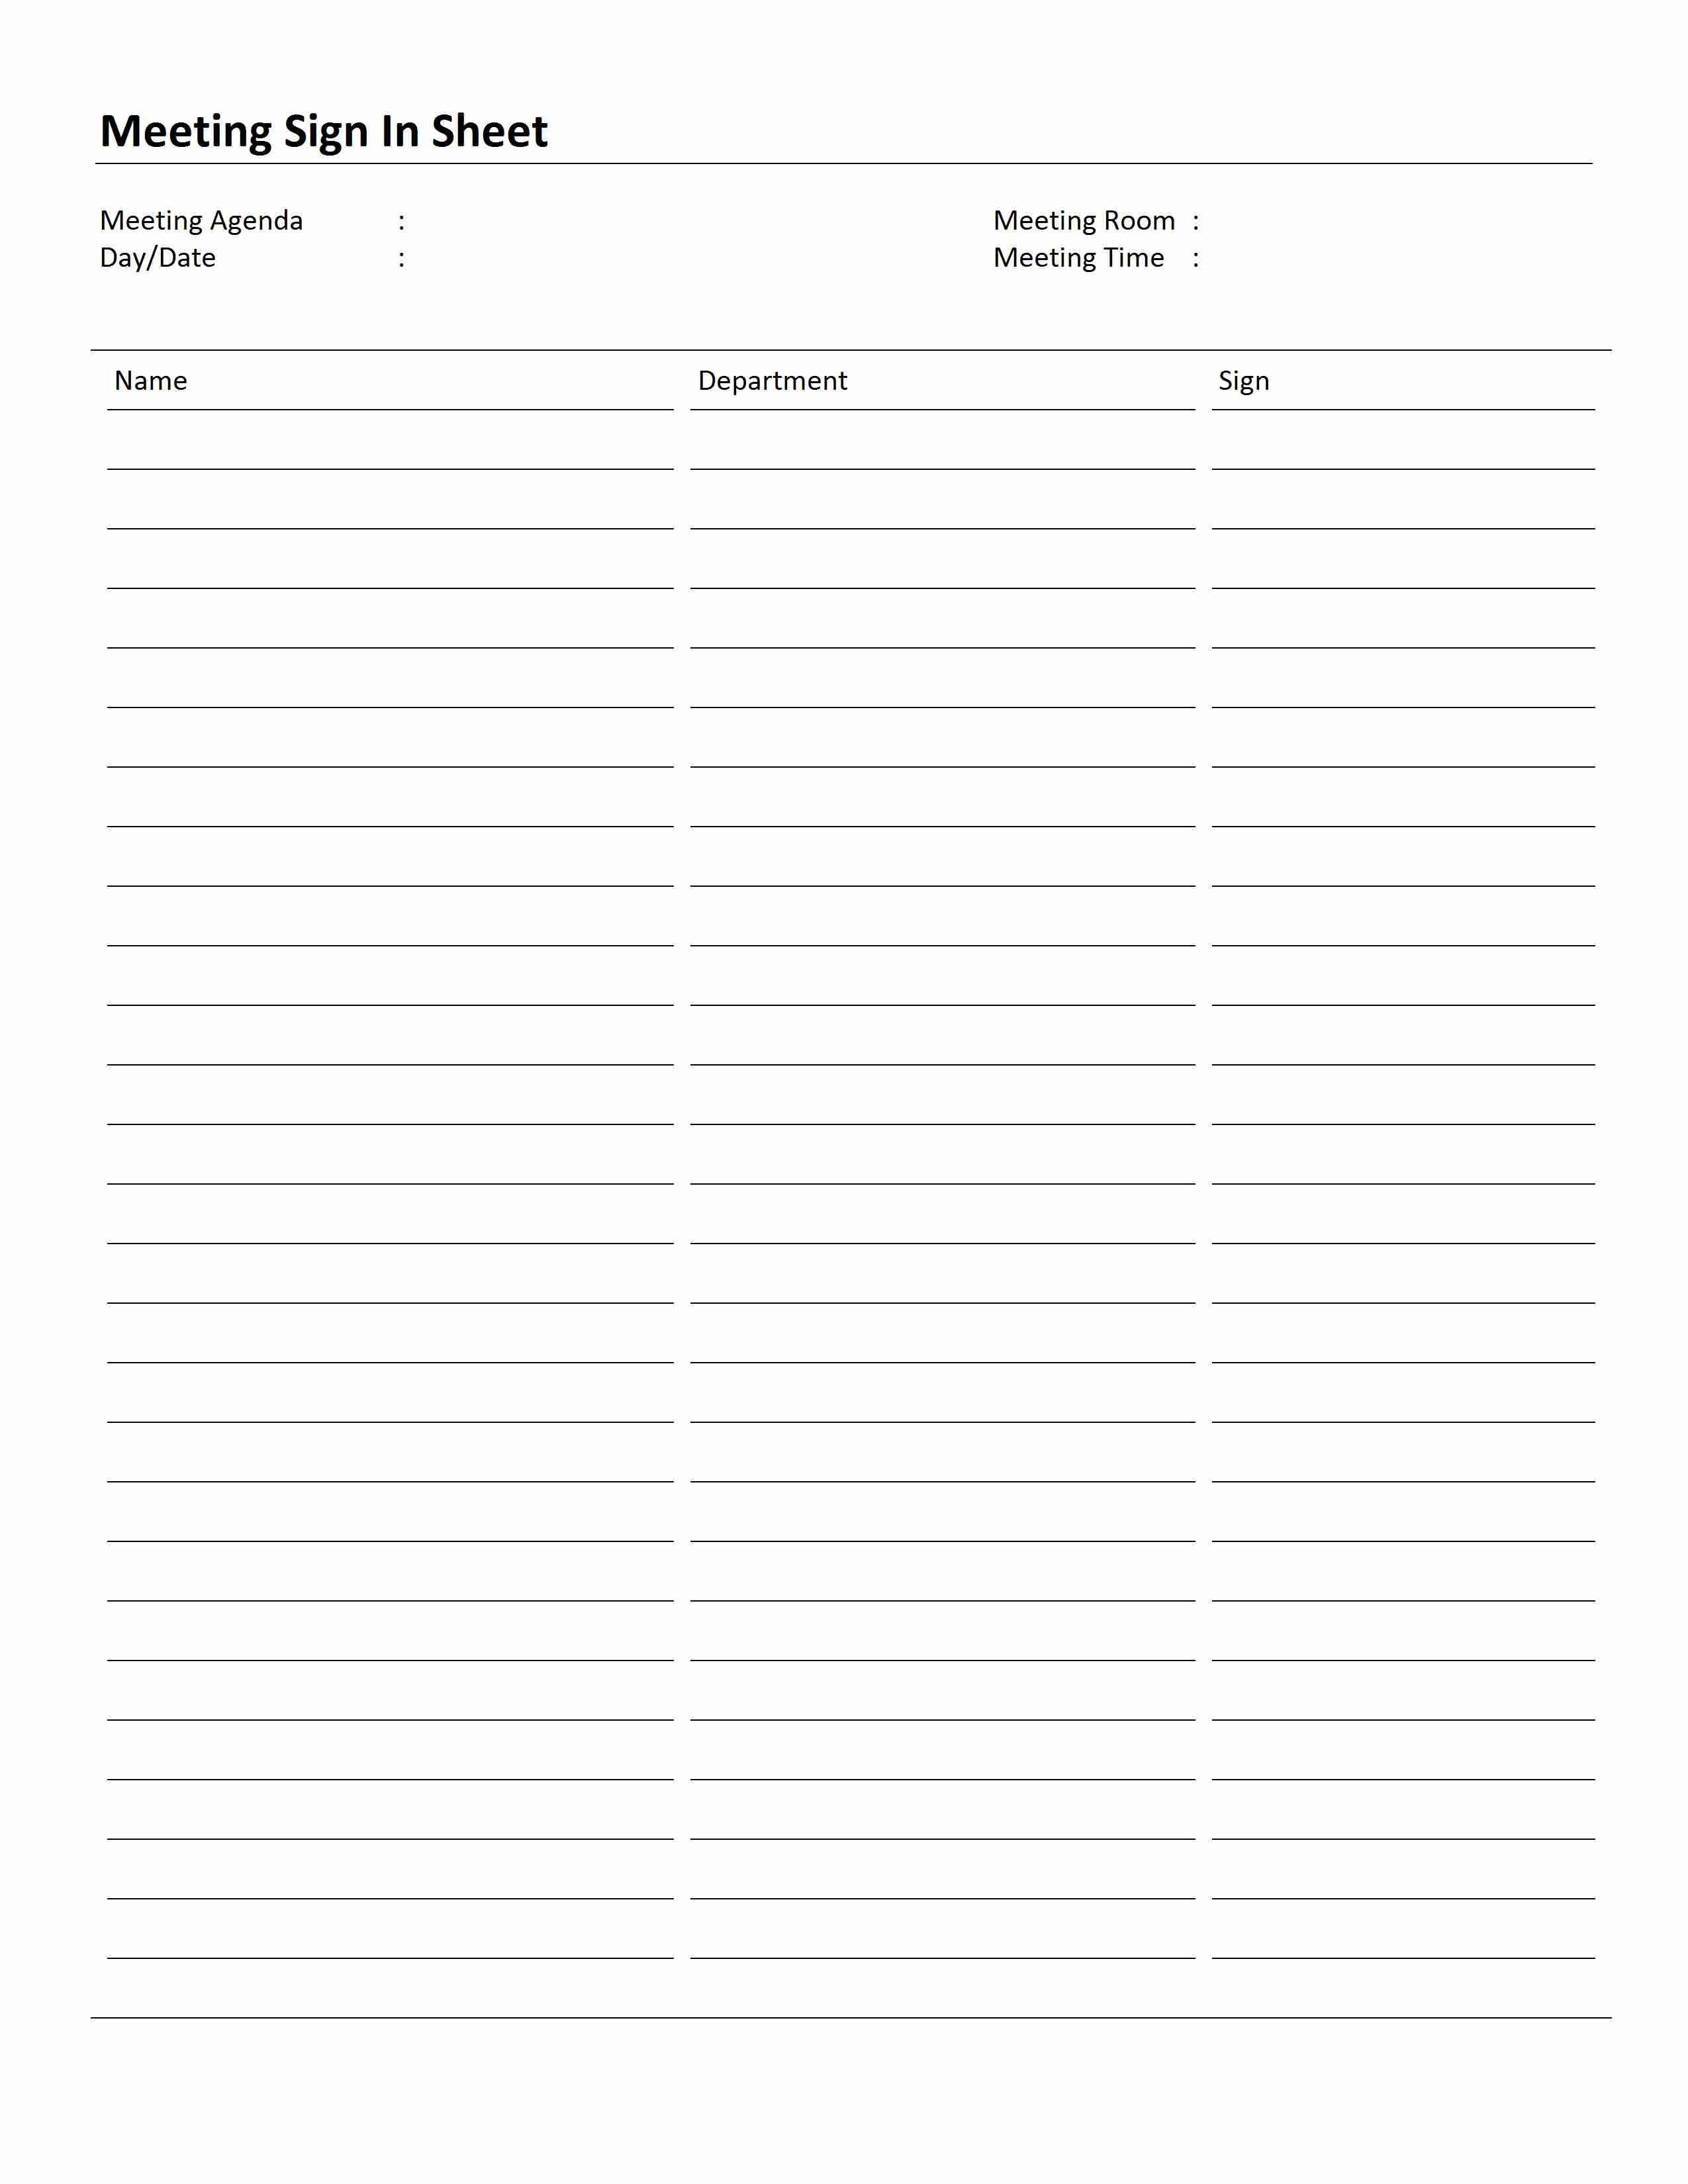 Meeting Sign In Sheet Template for Word